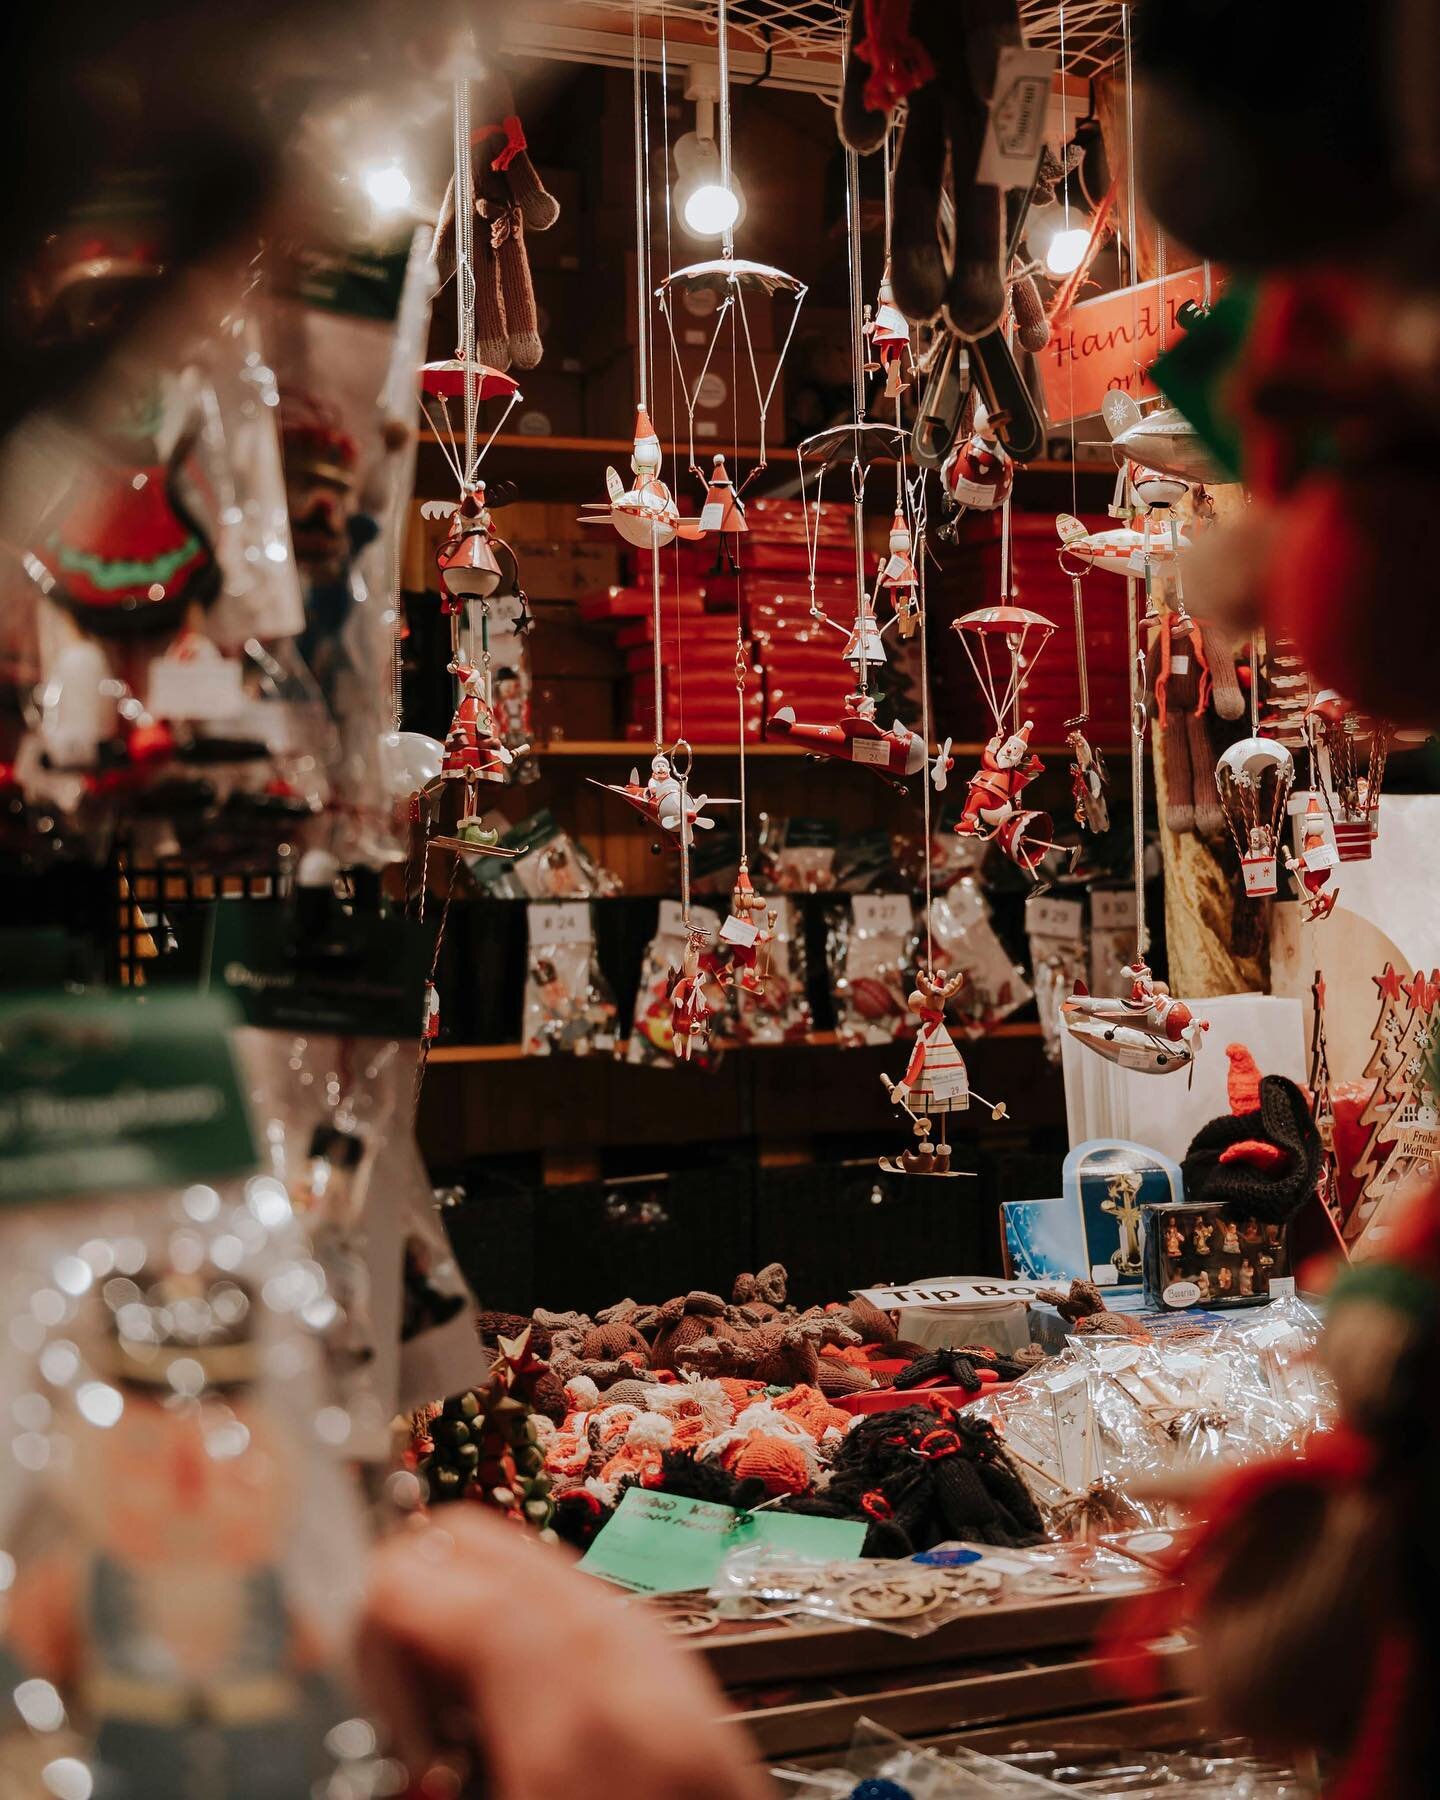 Have not started Christmas shopping. But this was a great place to start @chicago @thechristkindlmarket ..
.
.
.
.
.
#agameoftones #artofvisuals #createcommune #christmasphotography #folkgood  #globalcapture  #justgoshoot #livefolk #immigration #chic